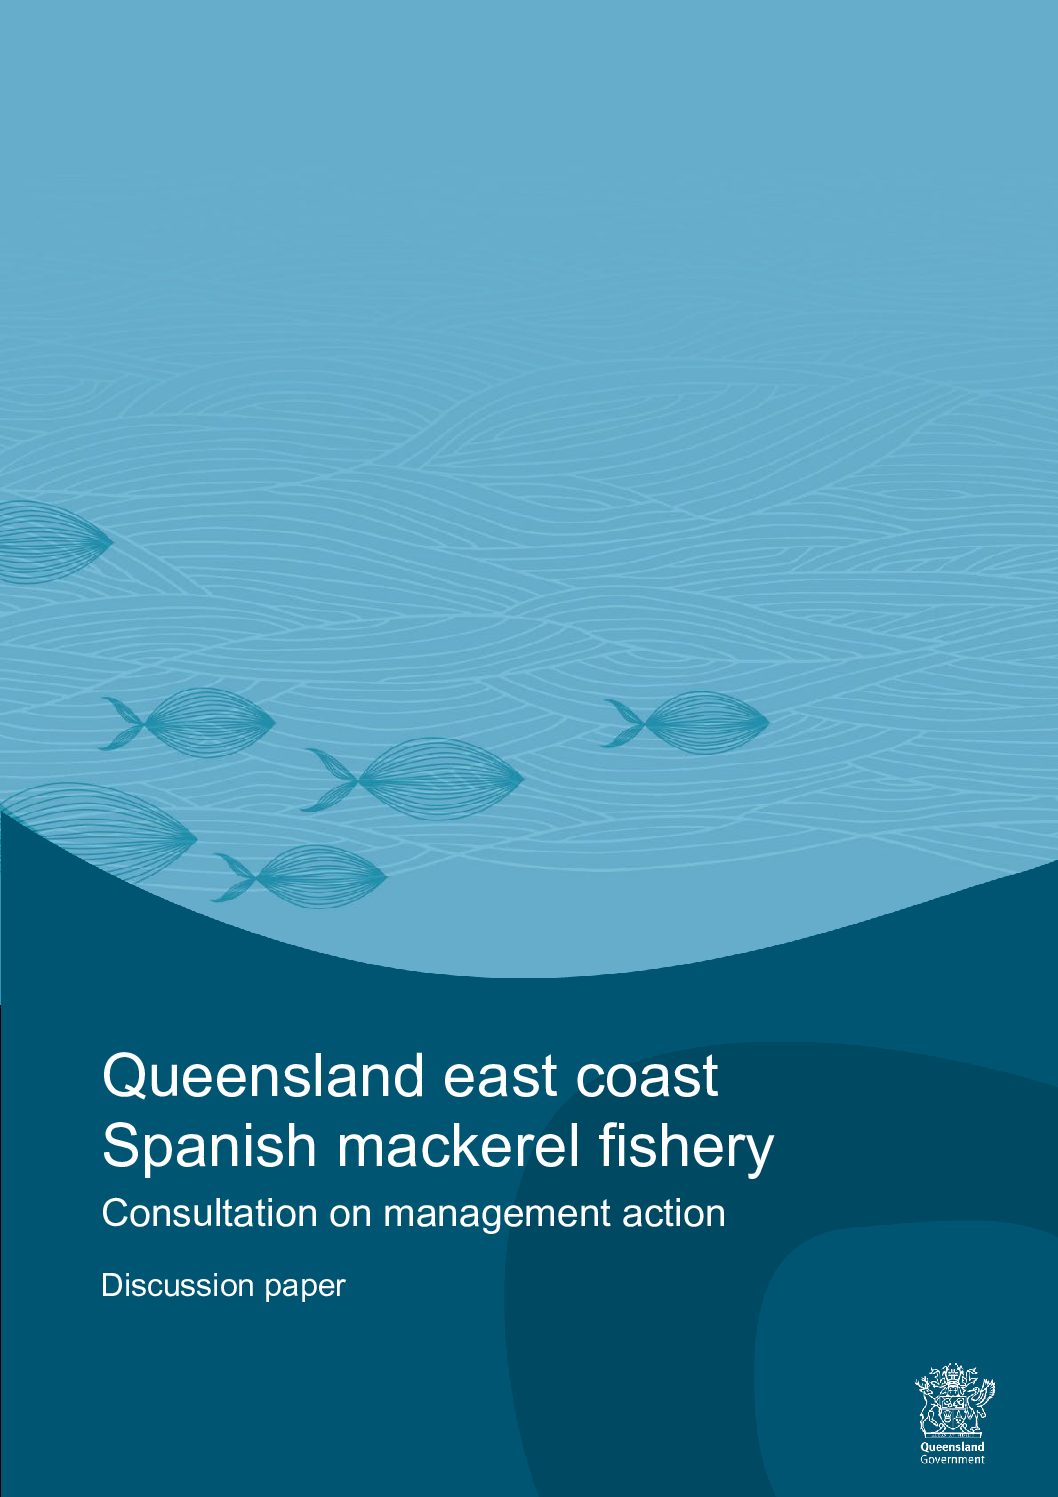 *** URGENT ACTION REQUIRED***  Spanish Mackerel Survey Closes May 5th